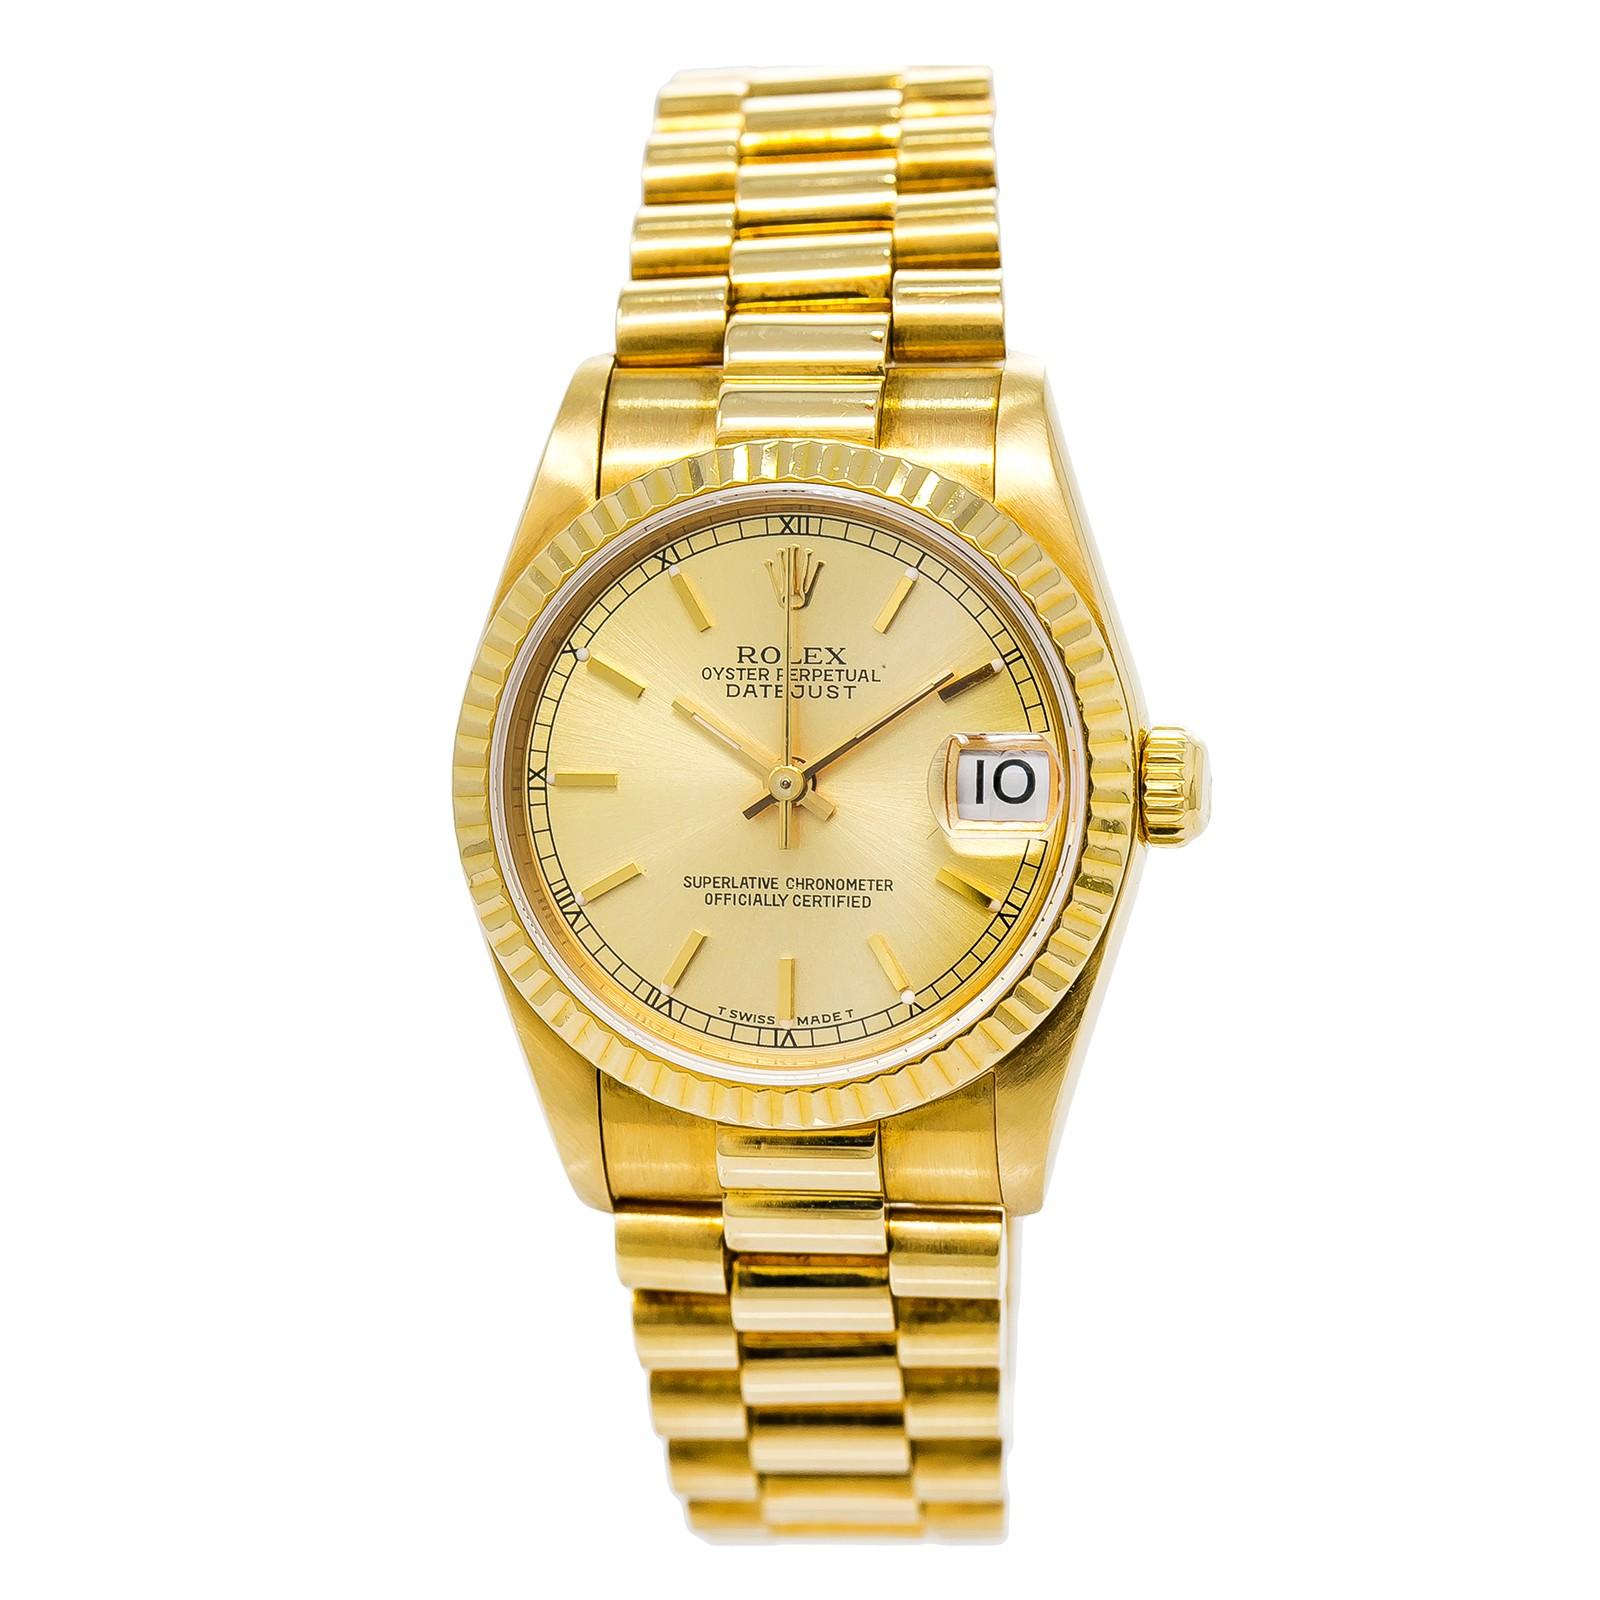 Certified 1990 Rolex Datejust 68278 29 Gold Dial For Sale